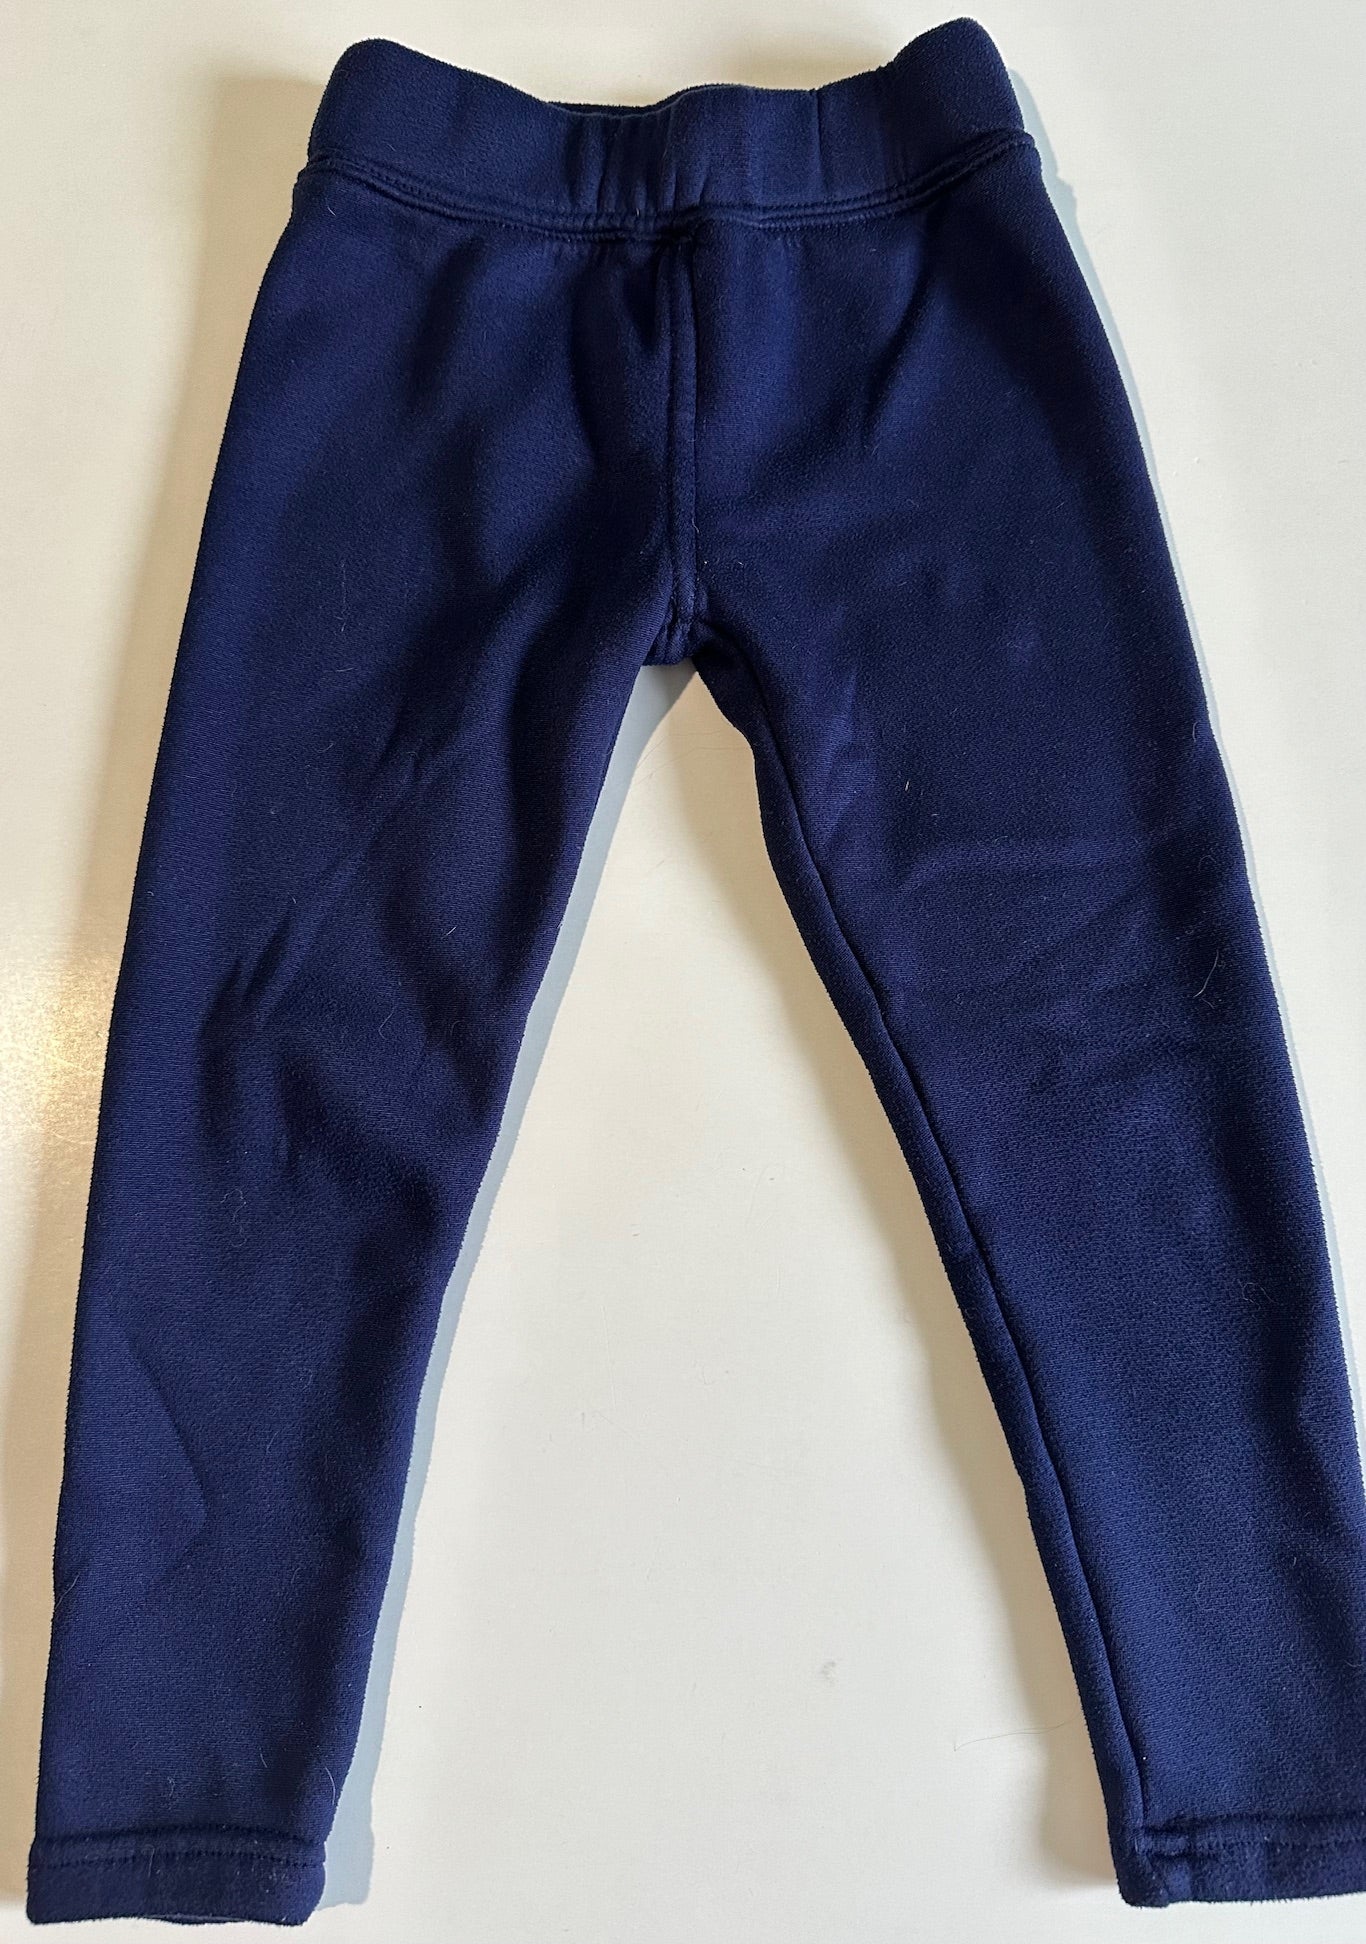 *Play* Unknown Brand, Dark Blue Thick Leggings - Size 4